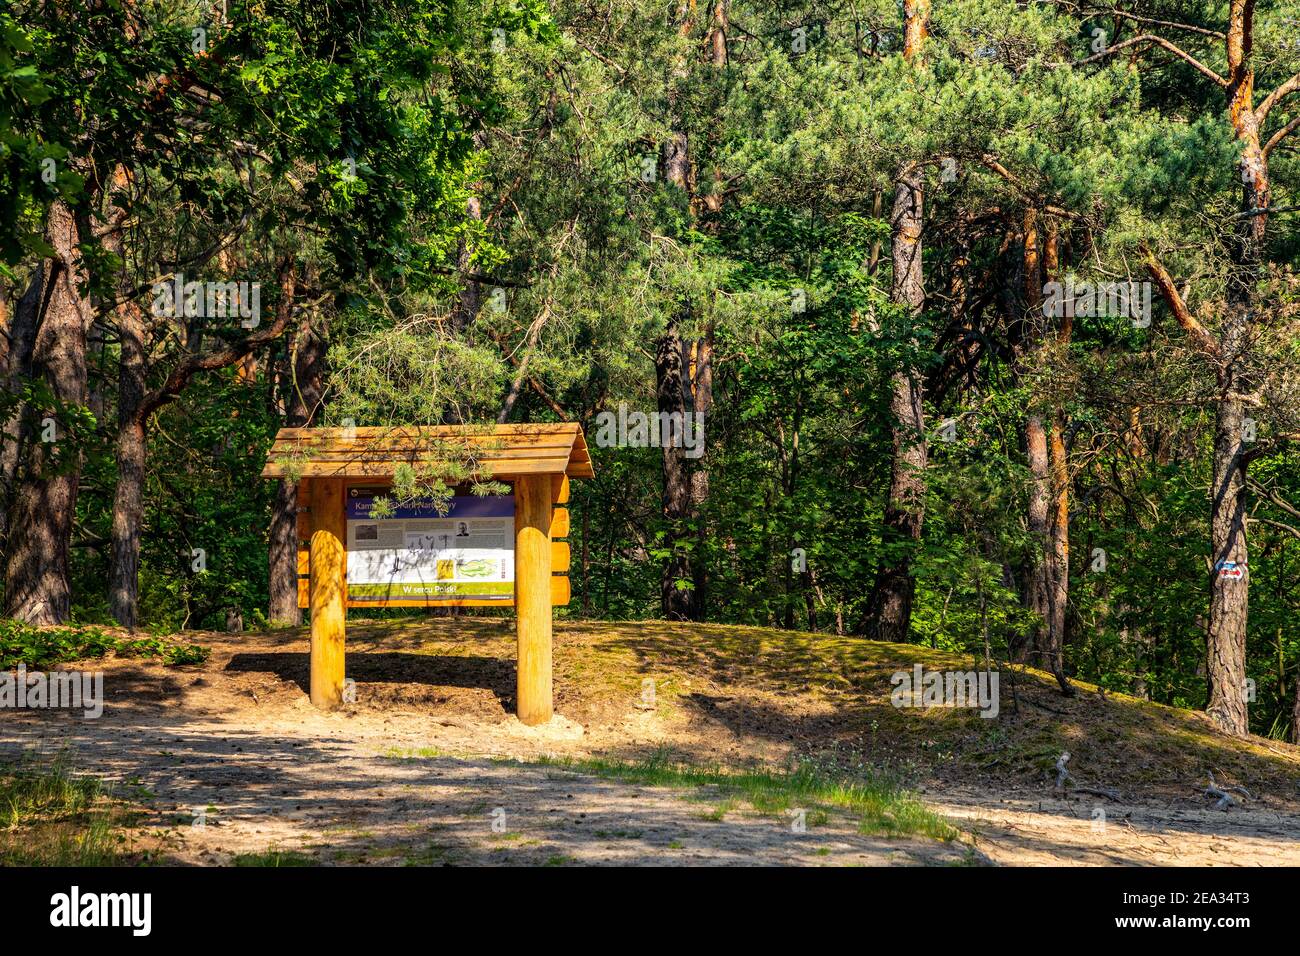 Izabelin, Poland - June 28, 2020: Touristic guide board at walking track in thicket of Puszcza Kampinoska Forest in Izabelin town near Warsaw in centr Stock Photo